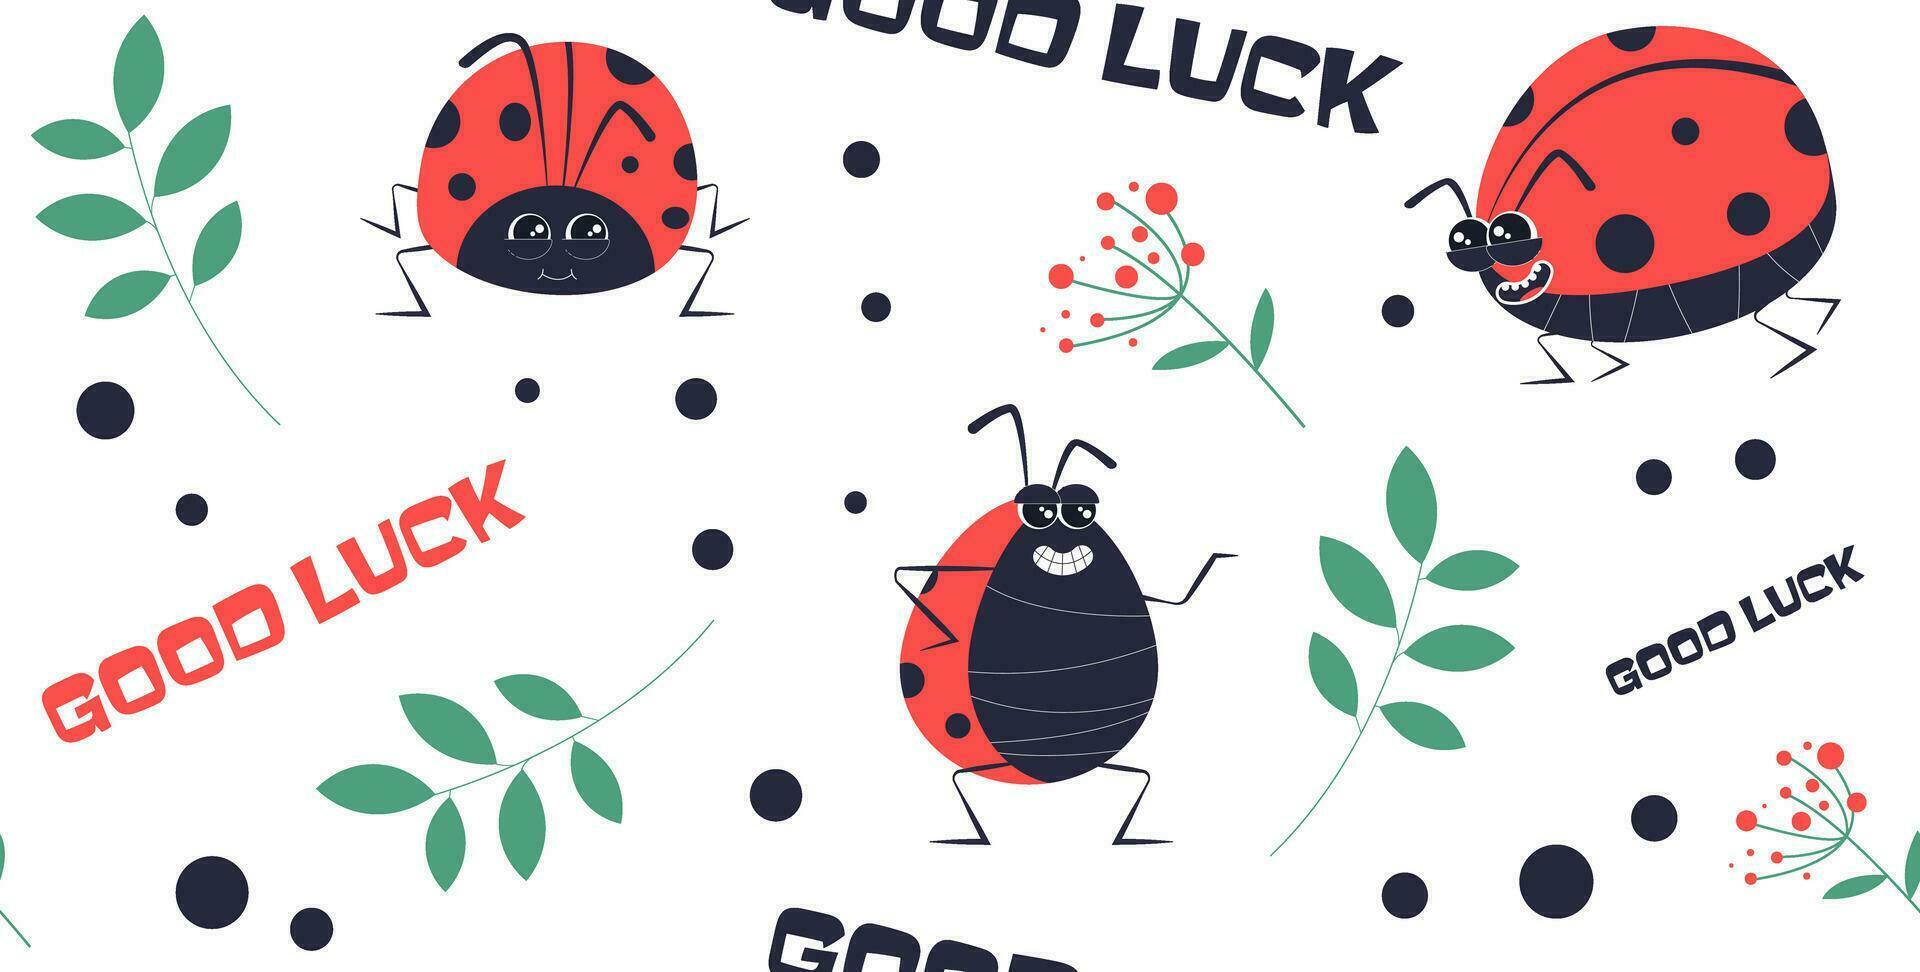 Cute ladybug character. Seamless background. Cartoon little ladybug mascot. Funny children's drawing. Vector drawing on a white isolated background.